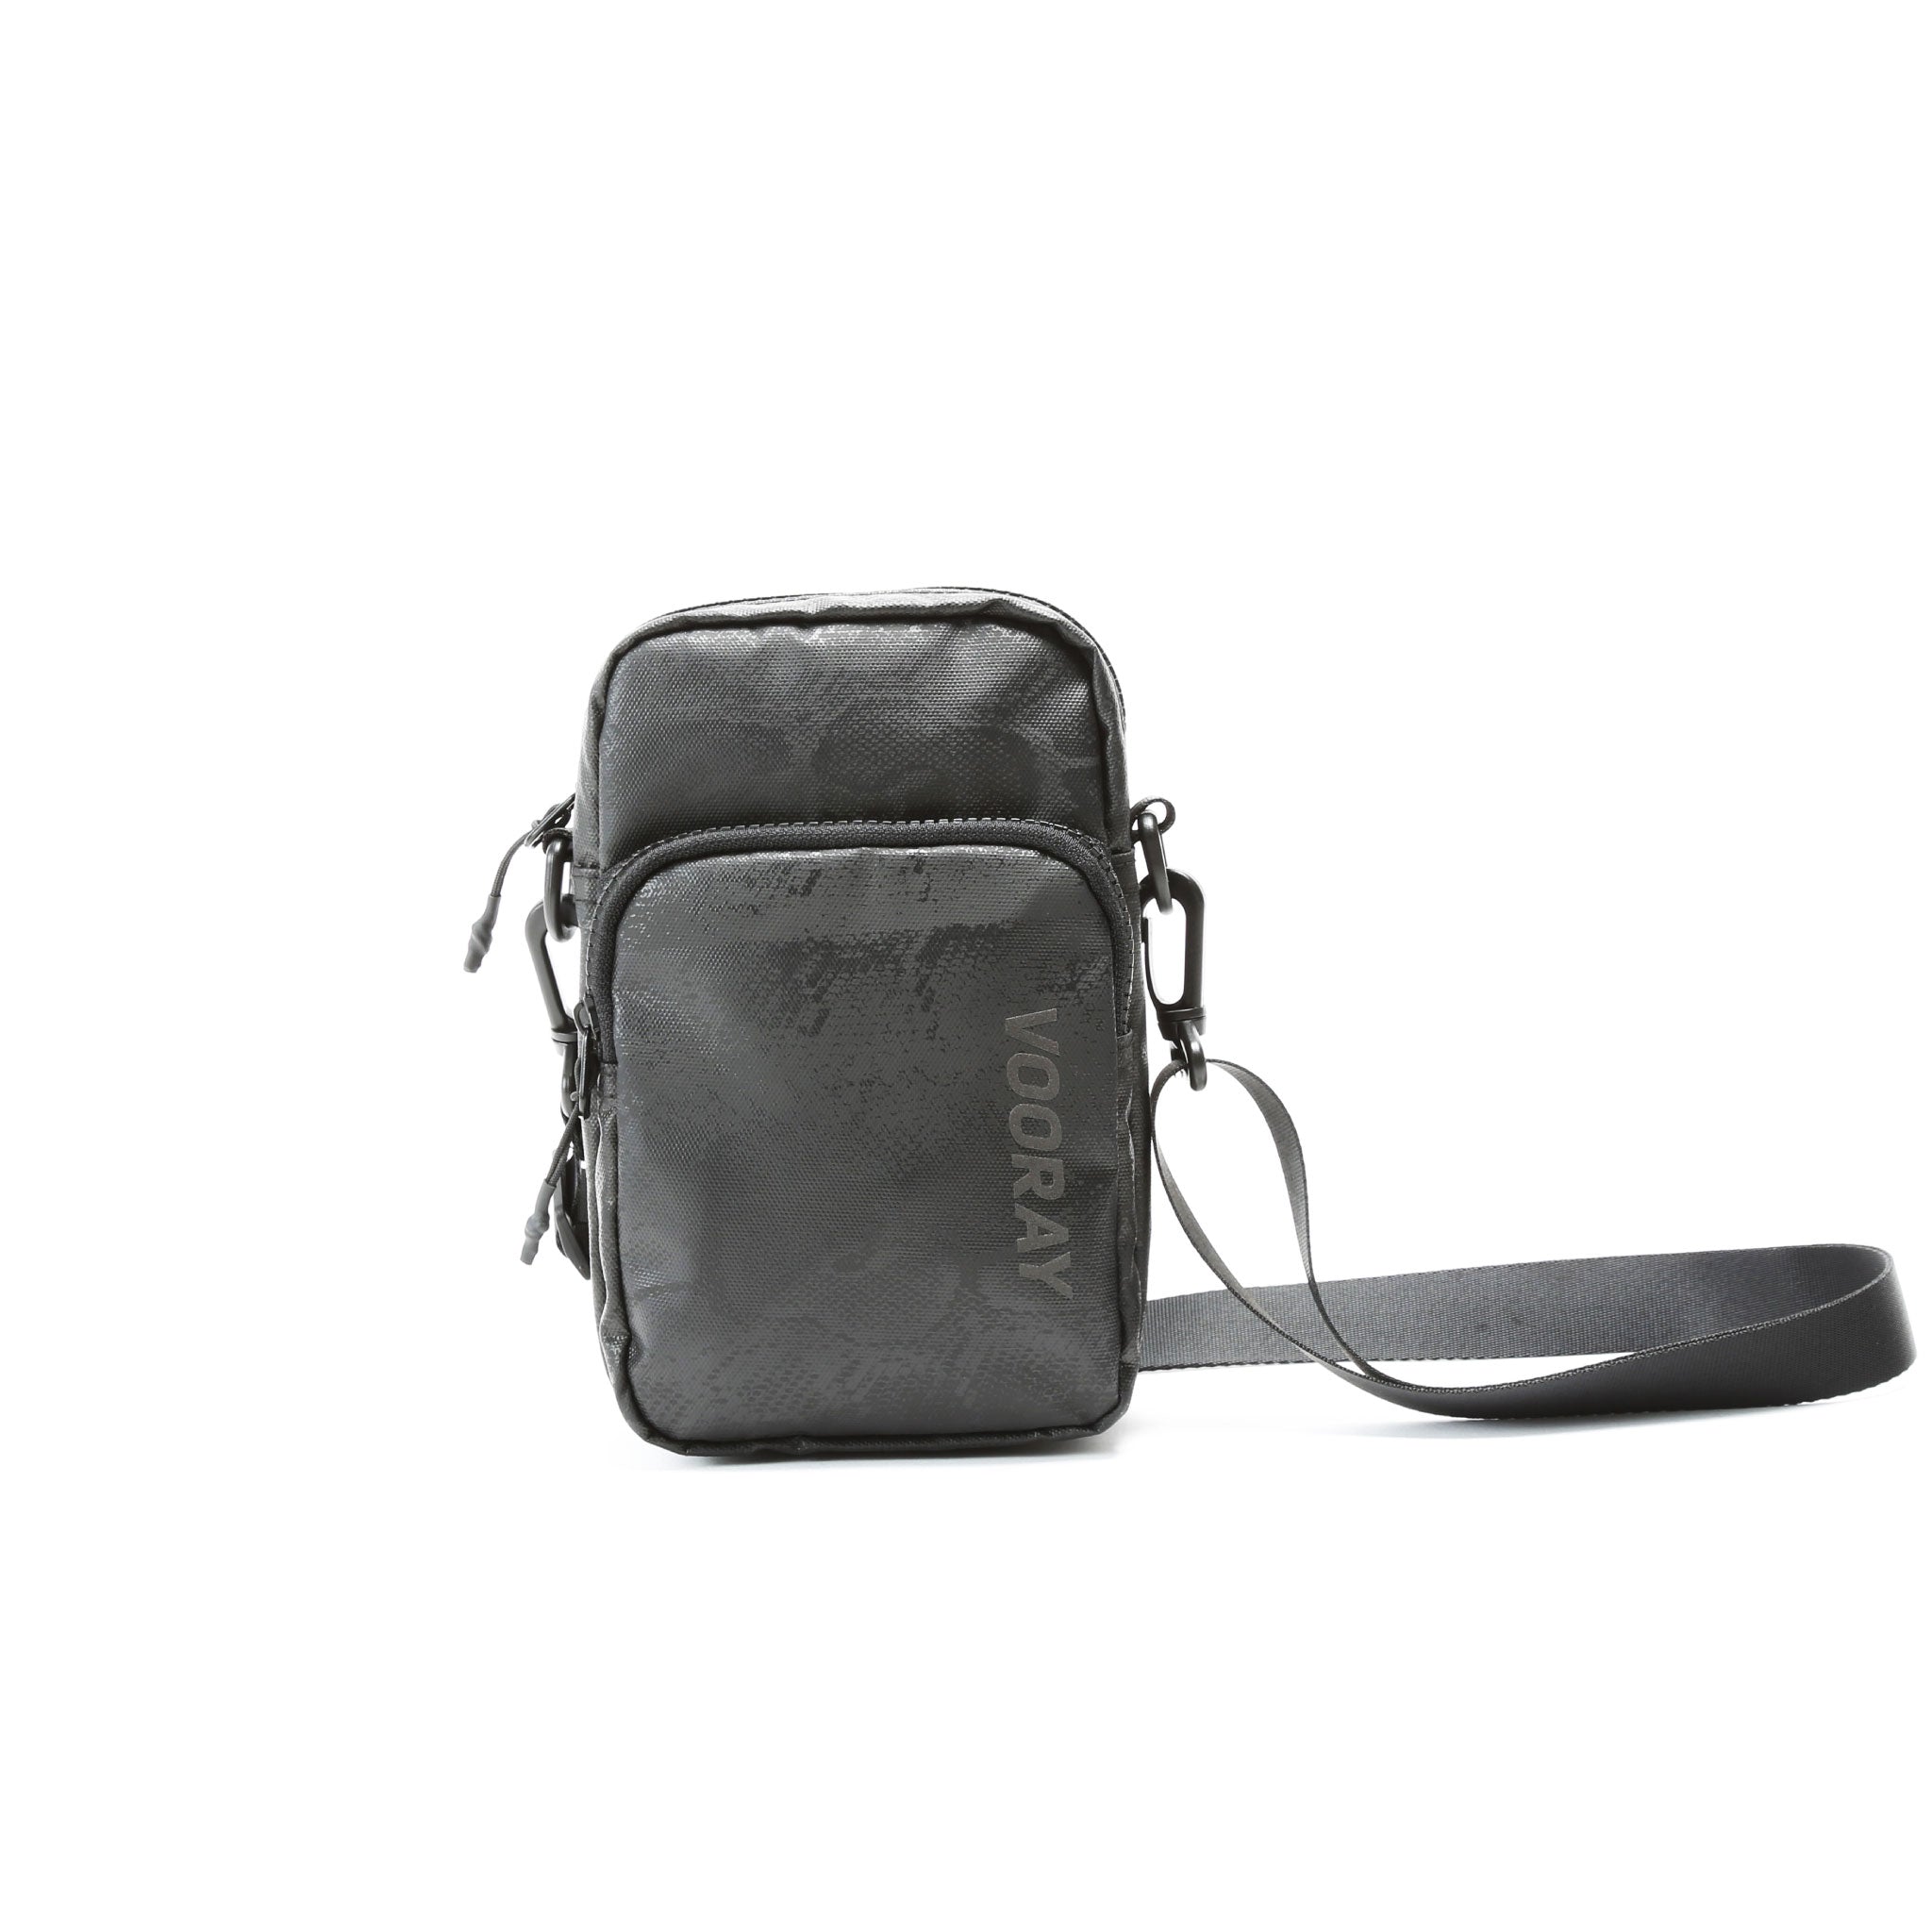 Vooray Lightweight Core Crossbody Bag for Gym, Travel, and Daily Use